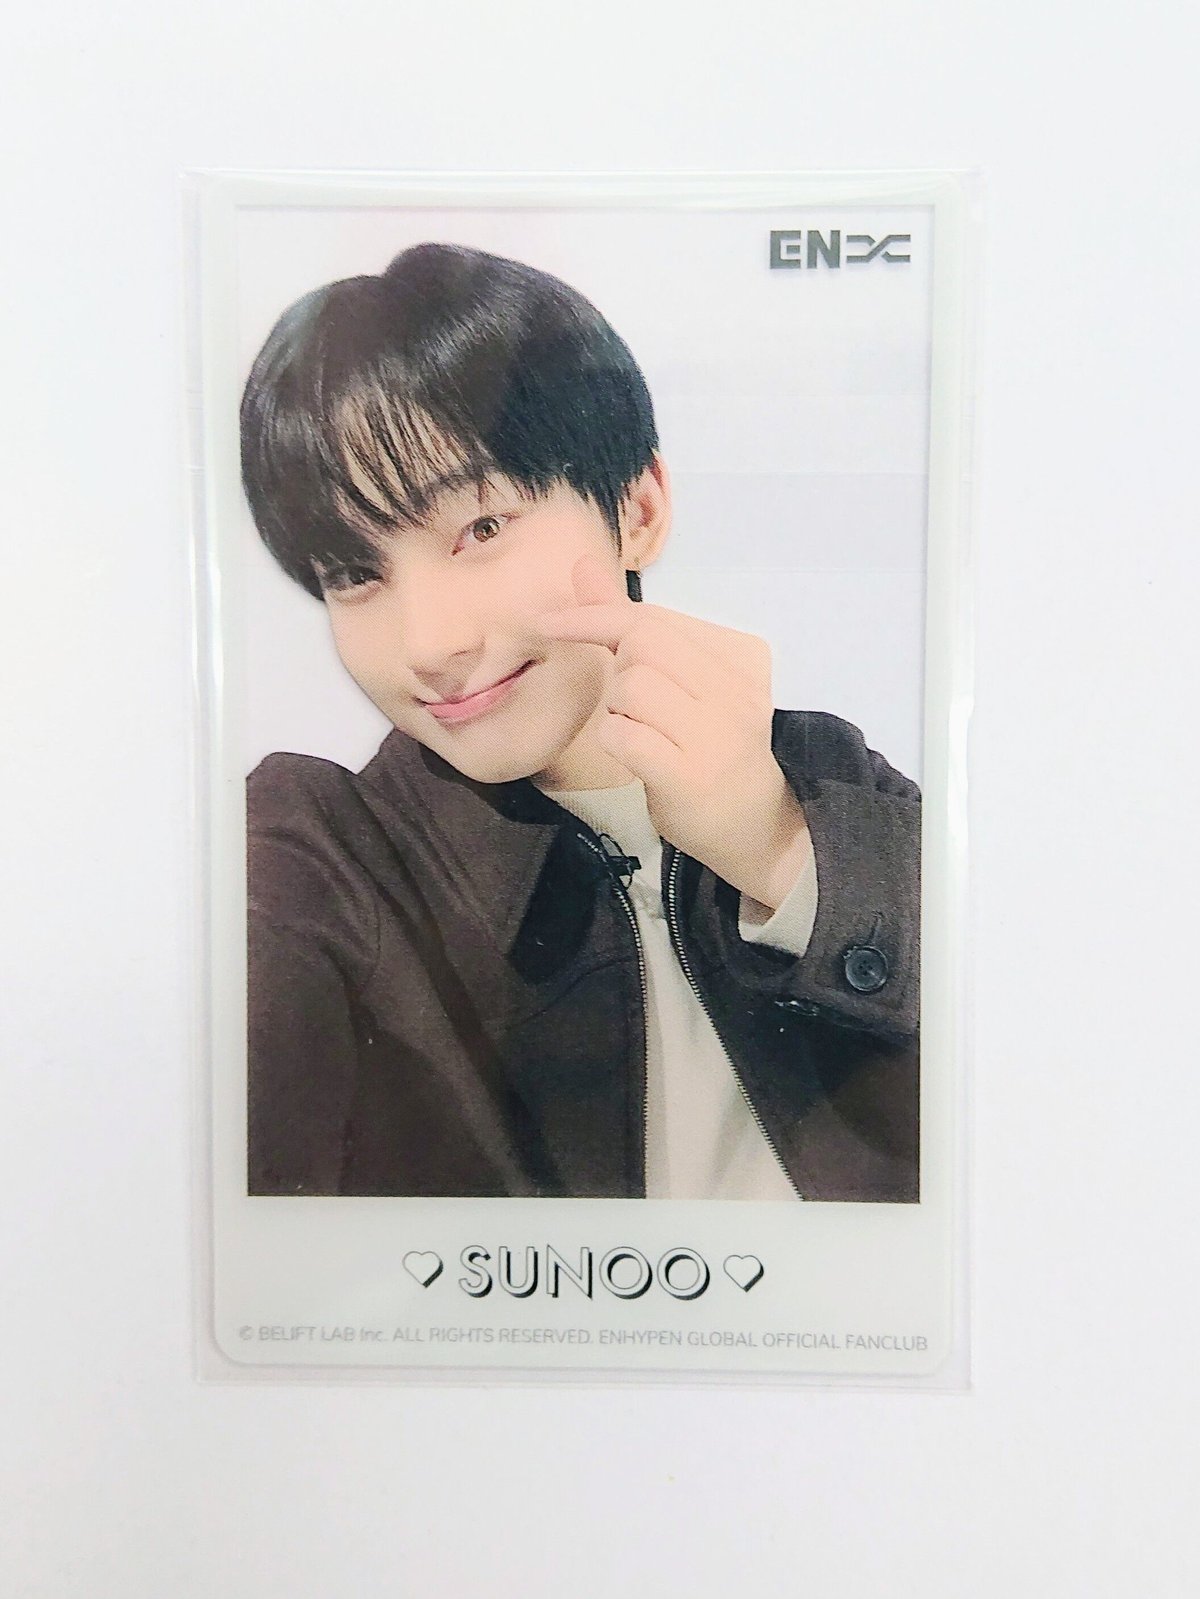 ENHYPENヒスン　閃光　ラキドロ　weverse